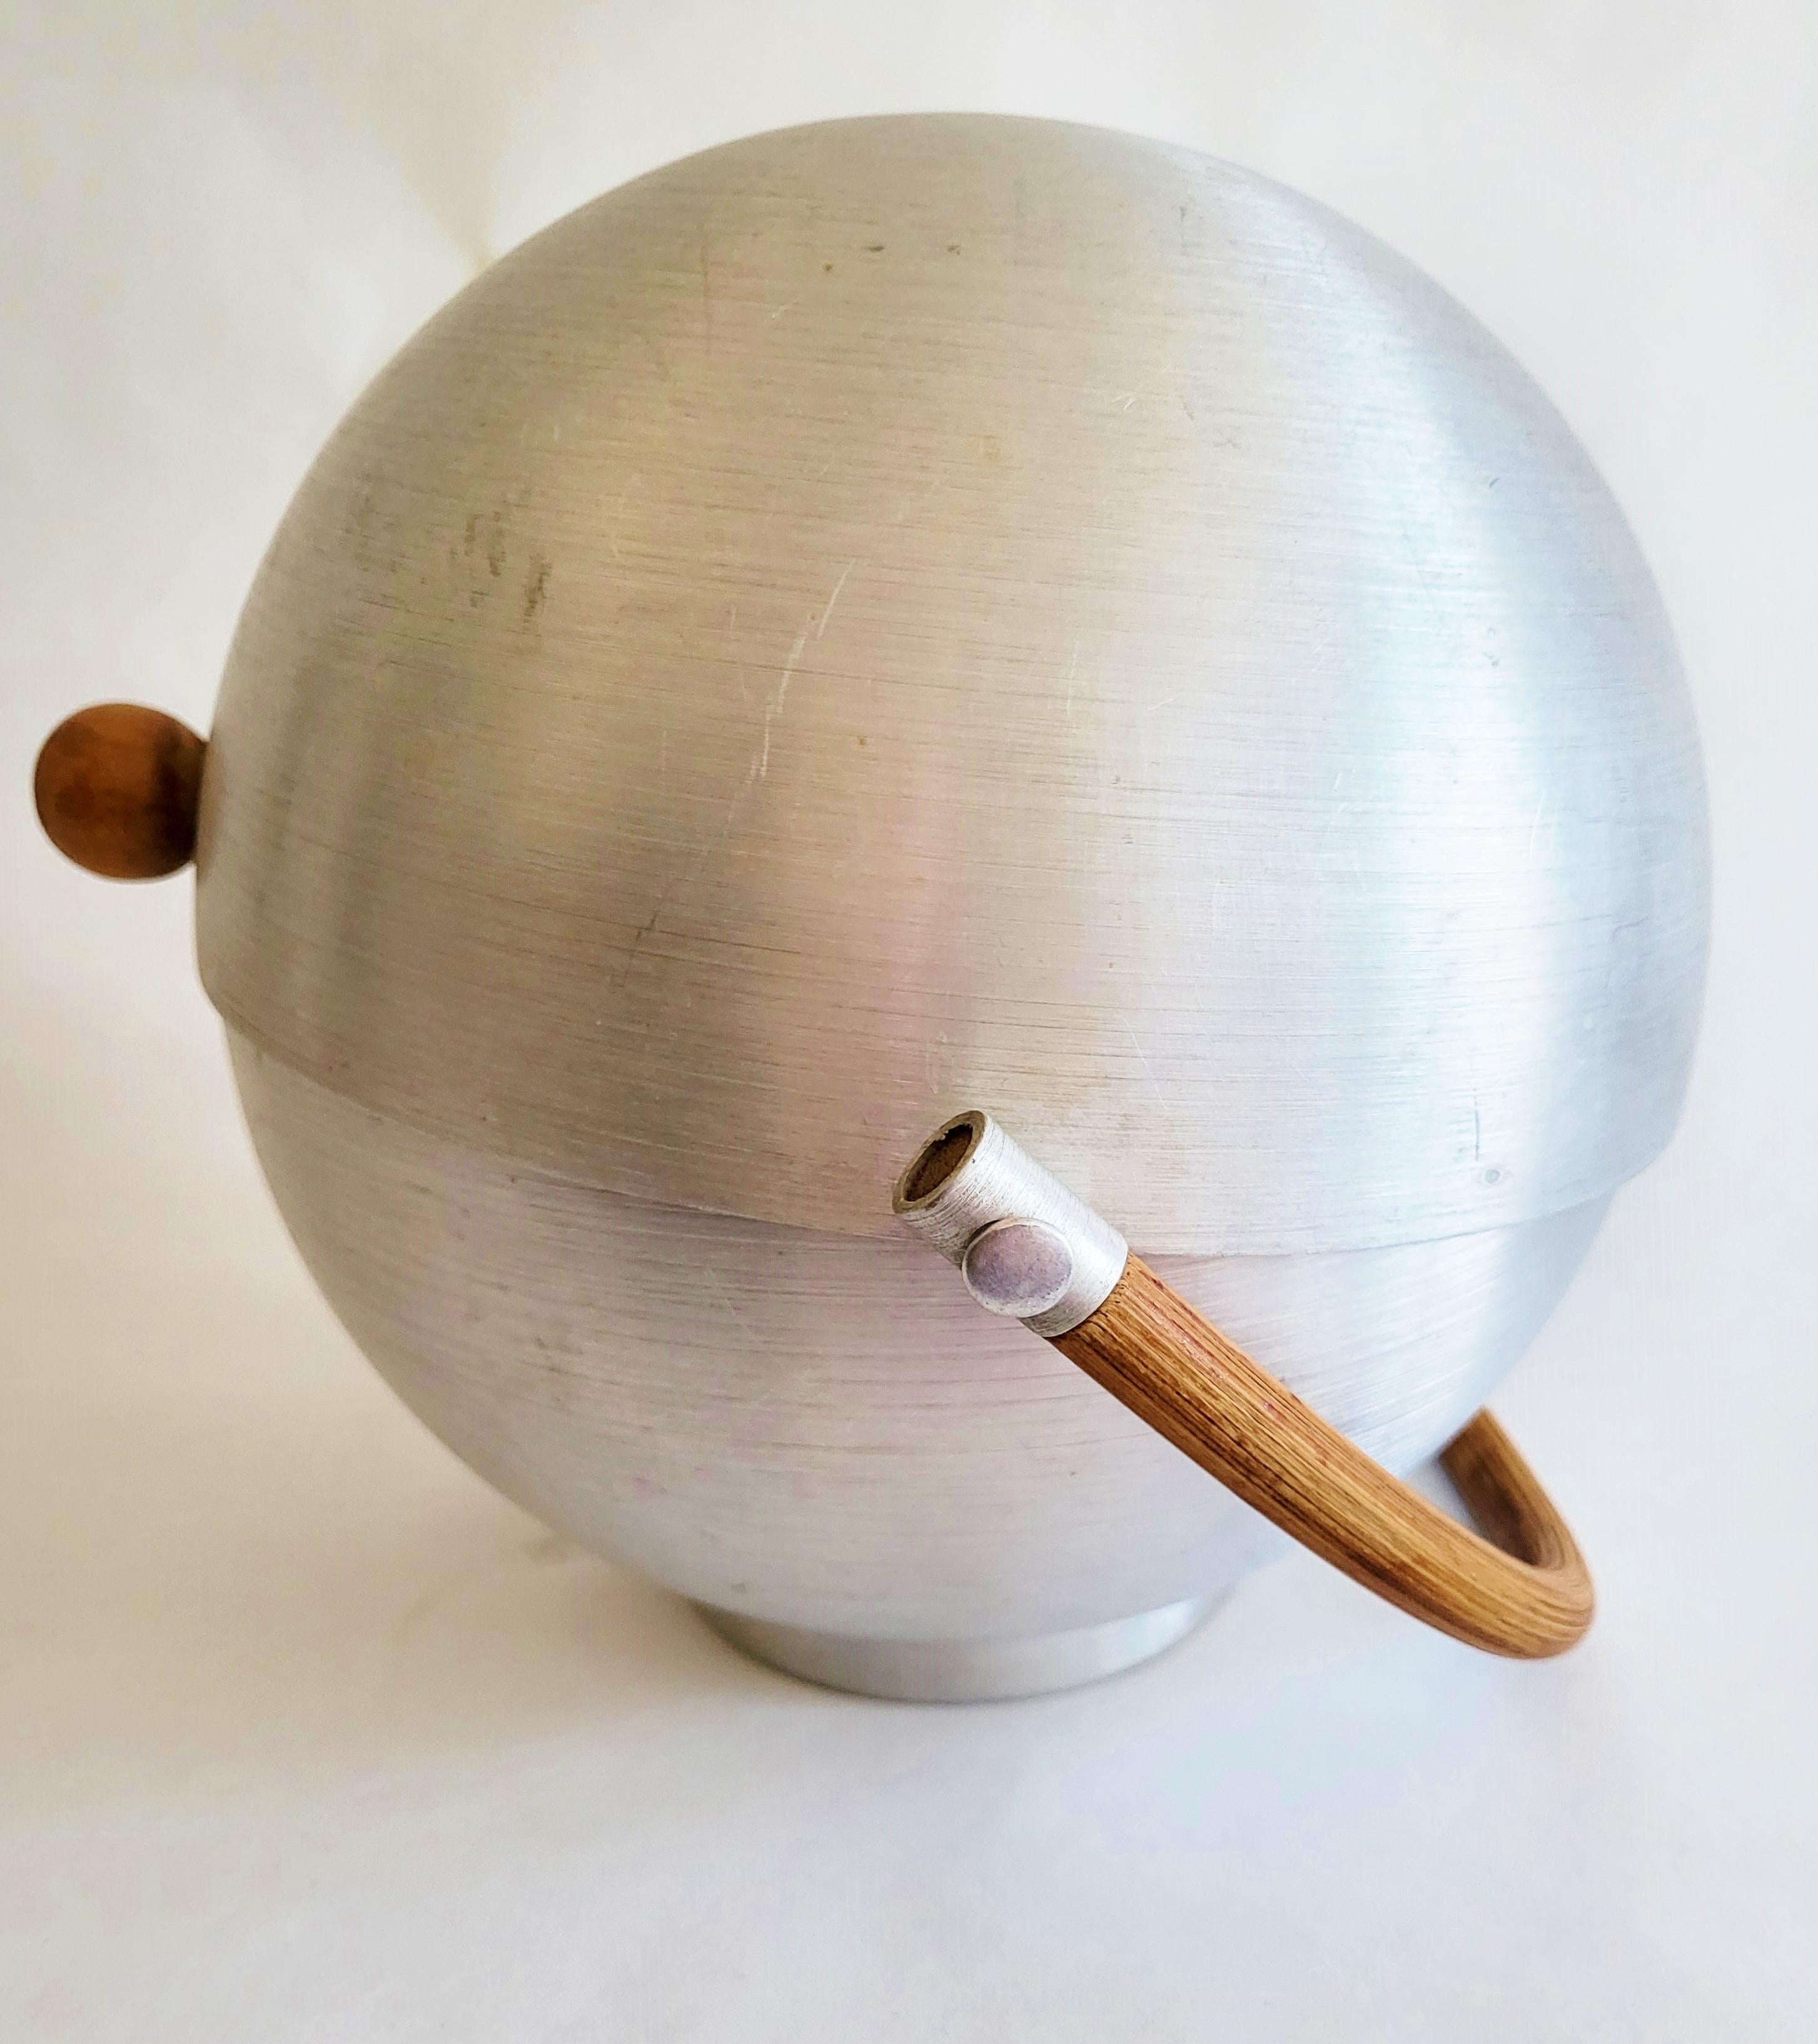 Mid-20th Century American Art Deco Spun Aluminum & Reed Spherical Muffin Warmer by Russel Wright. For Sale